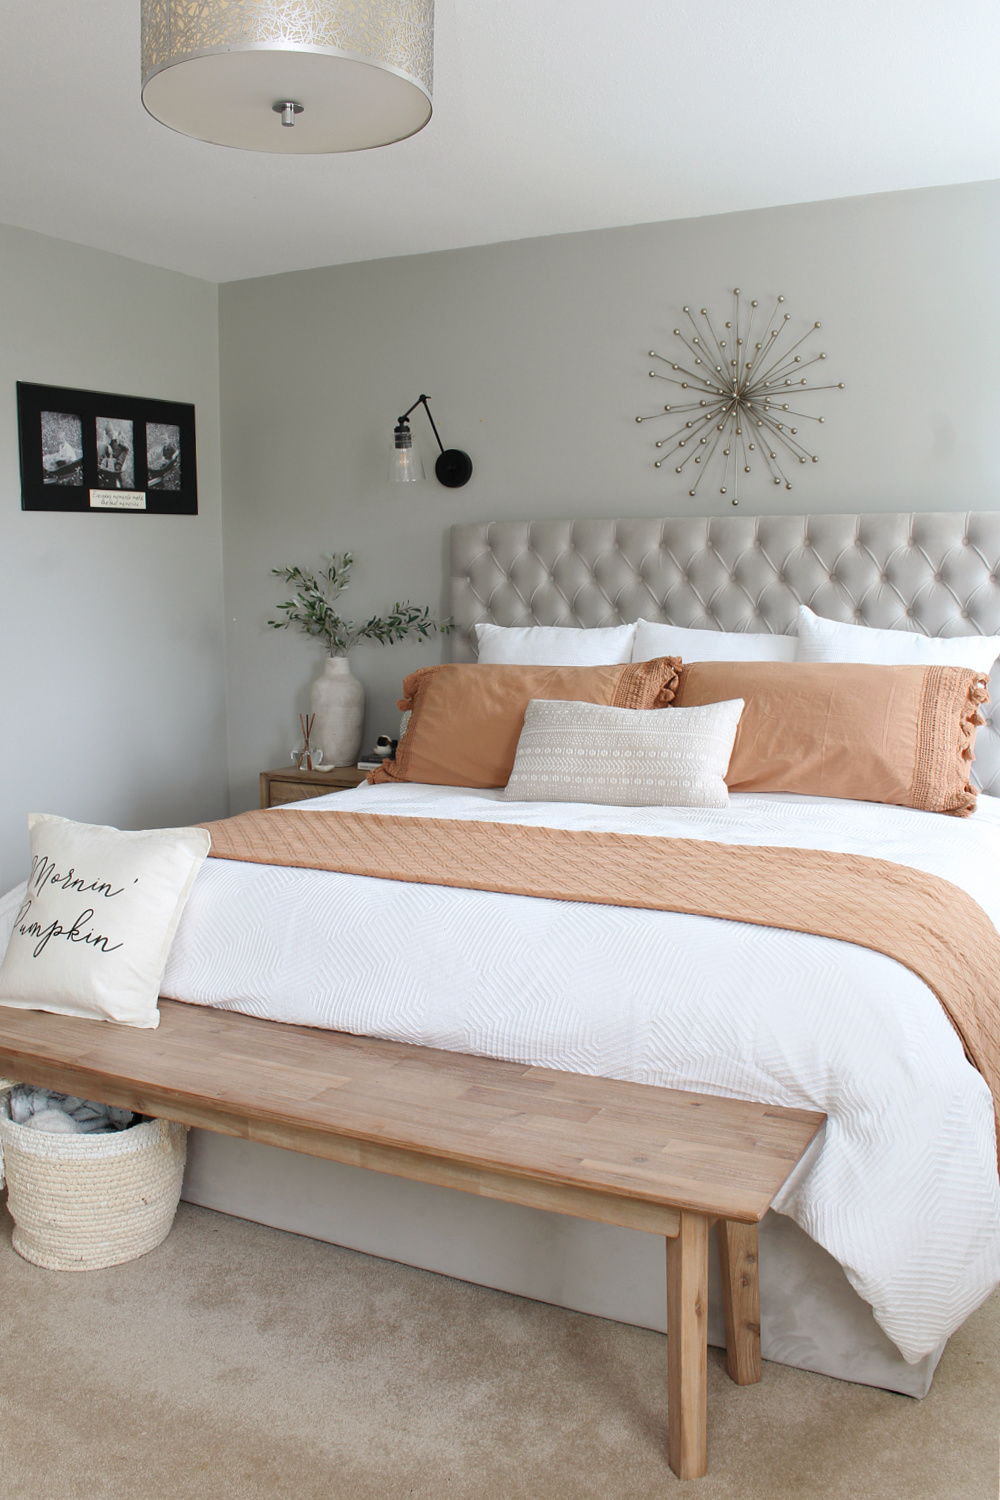 Bedroom Essentials for A Cozy Space